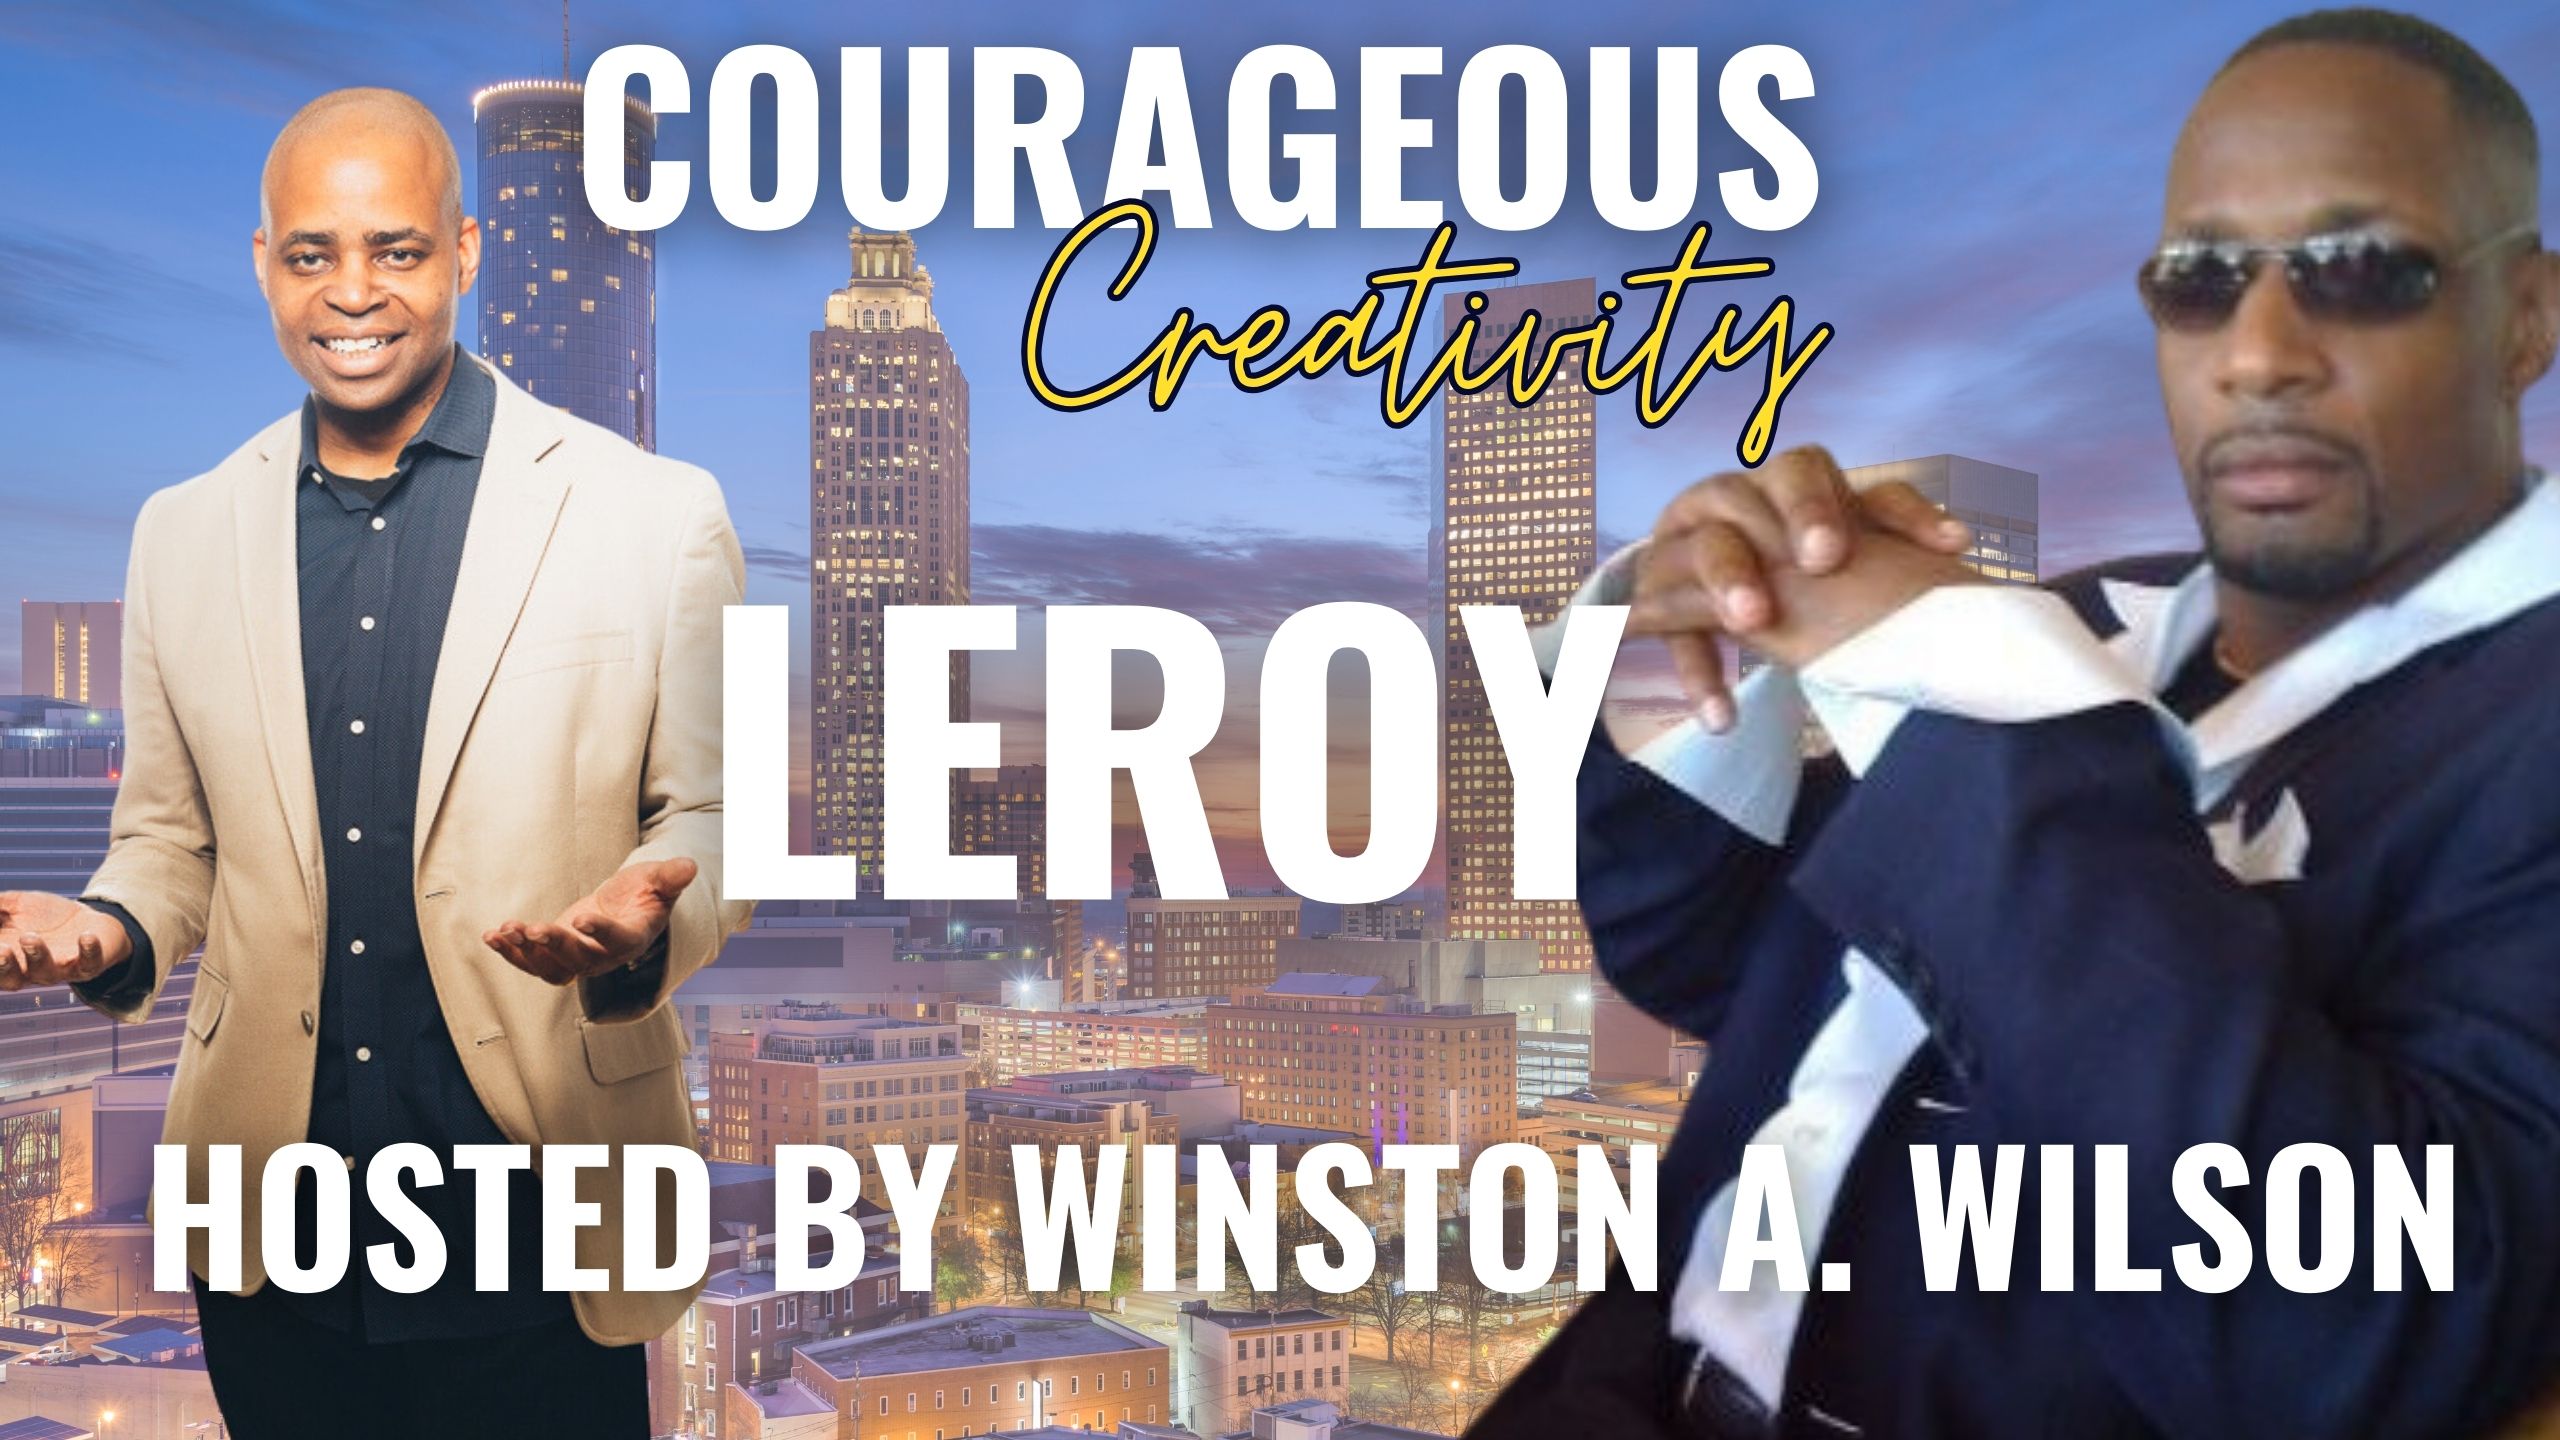 COURAGEOUS_CREATIVITY_WITH_LEROY_FINAL72try.j...